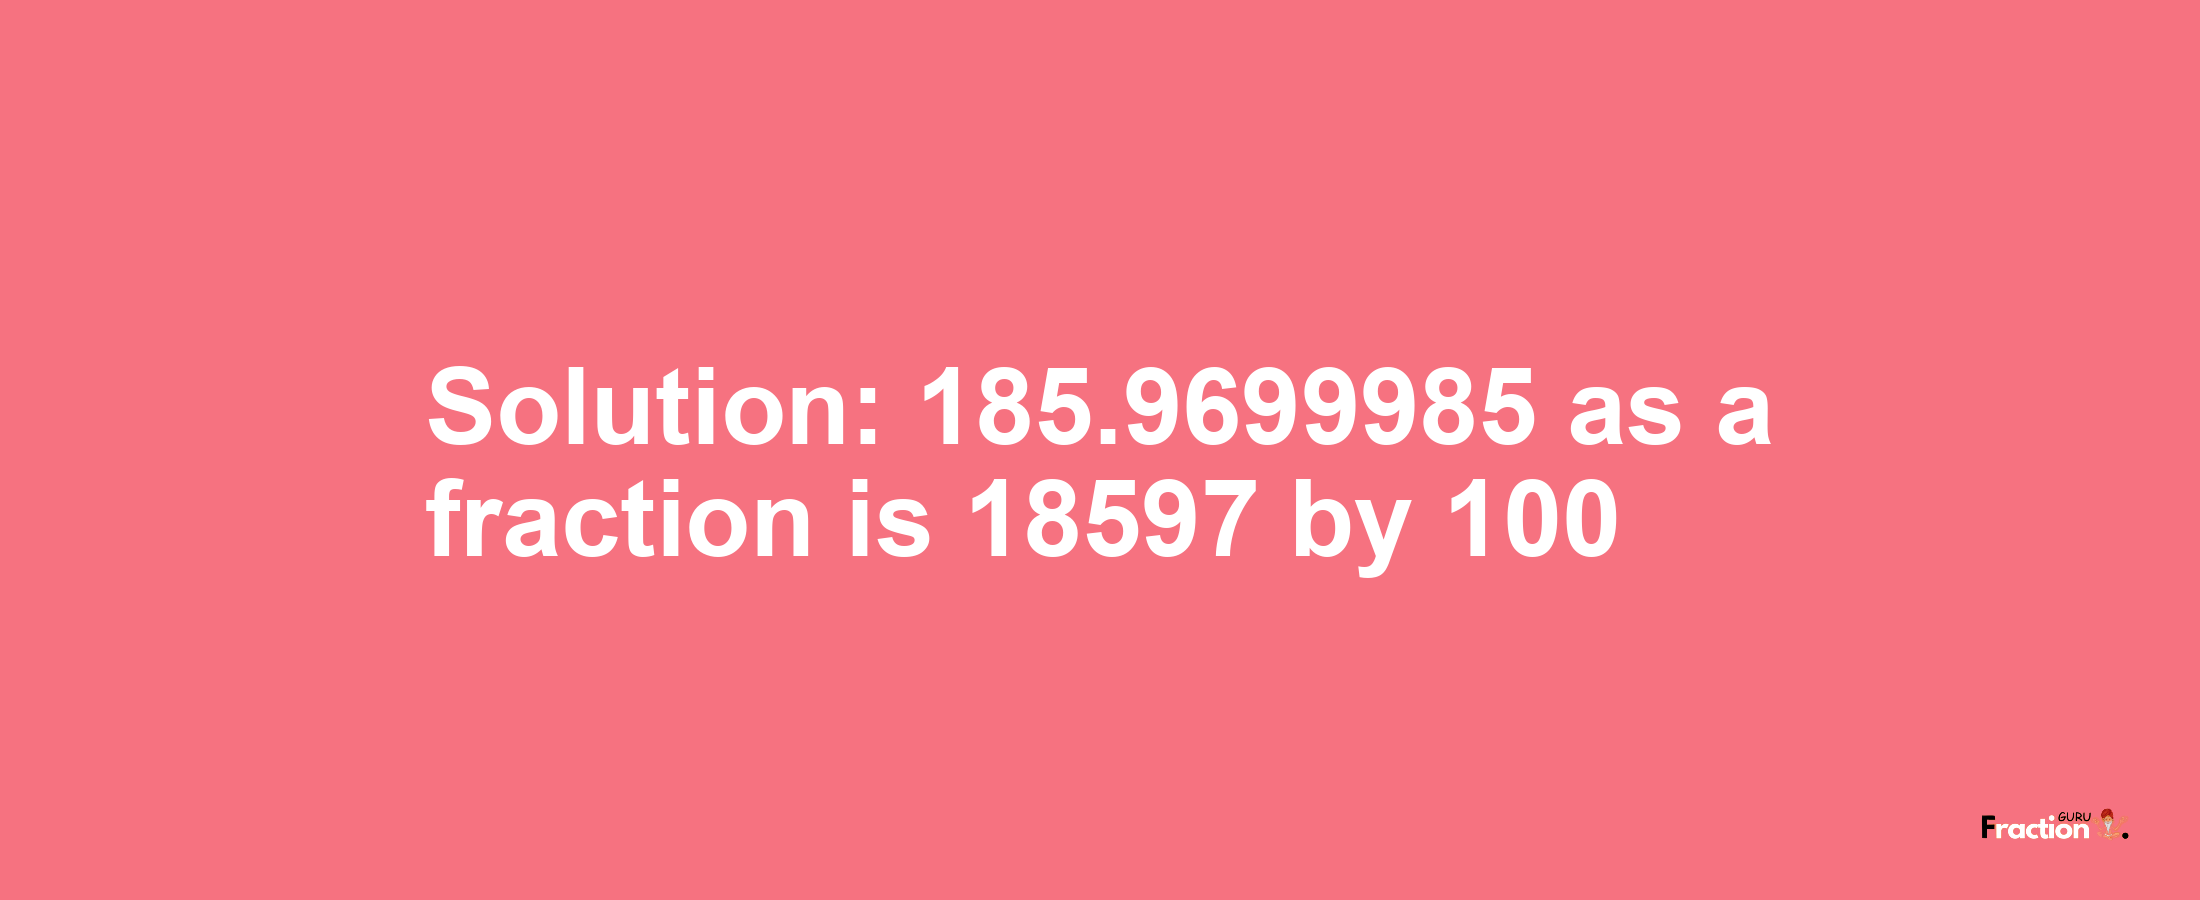 Solution:185.9699985 as a fraction is 18597/100